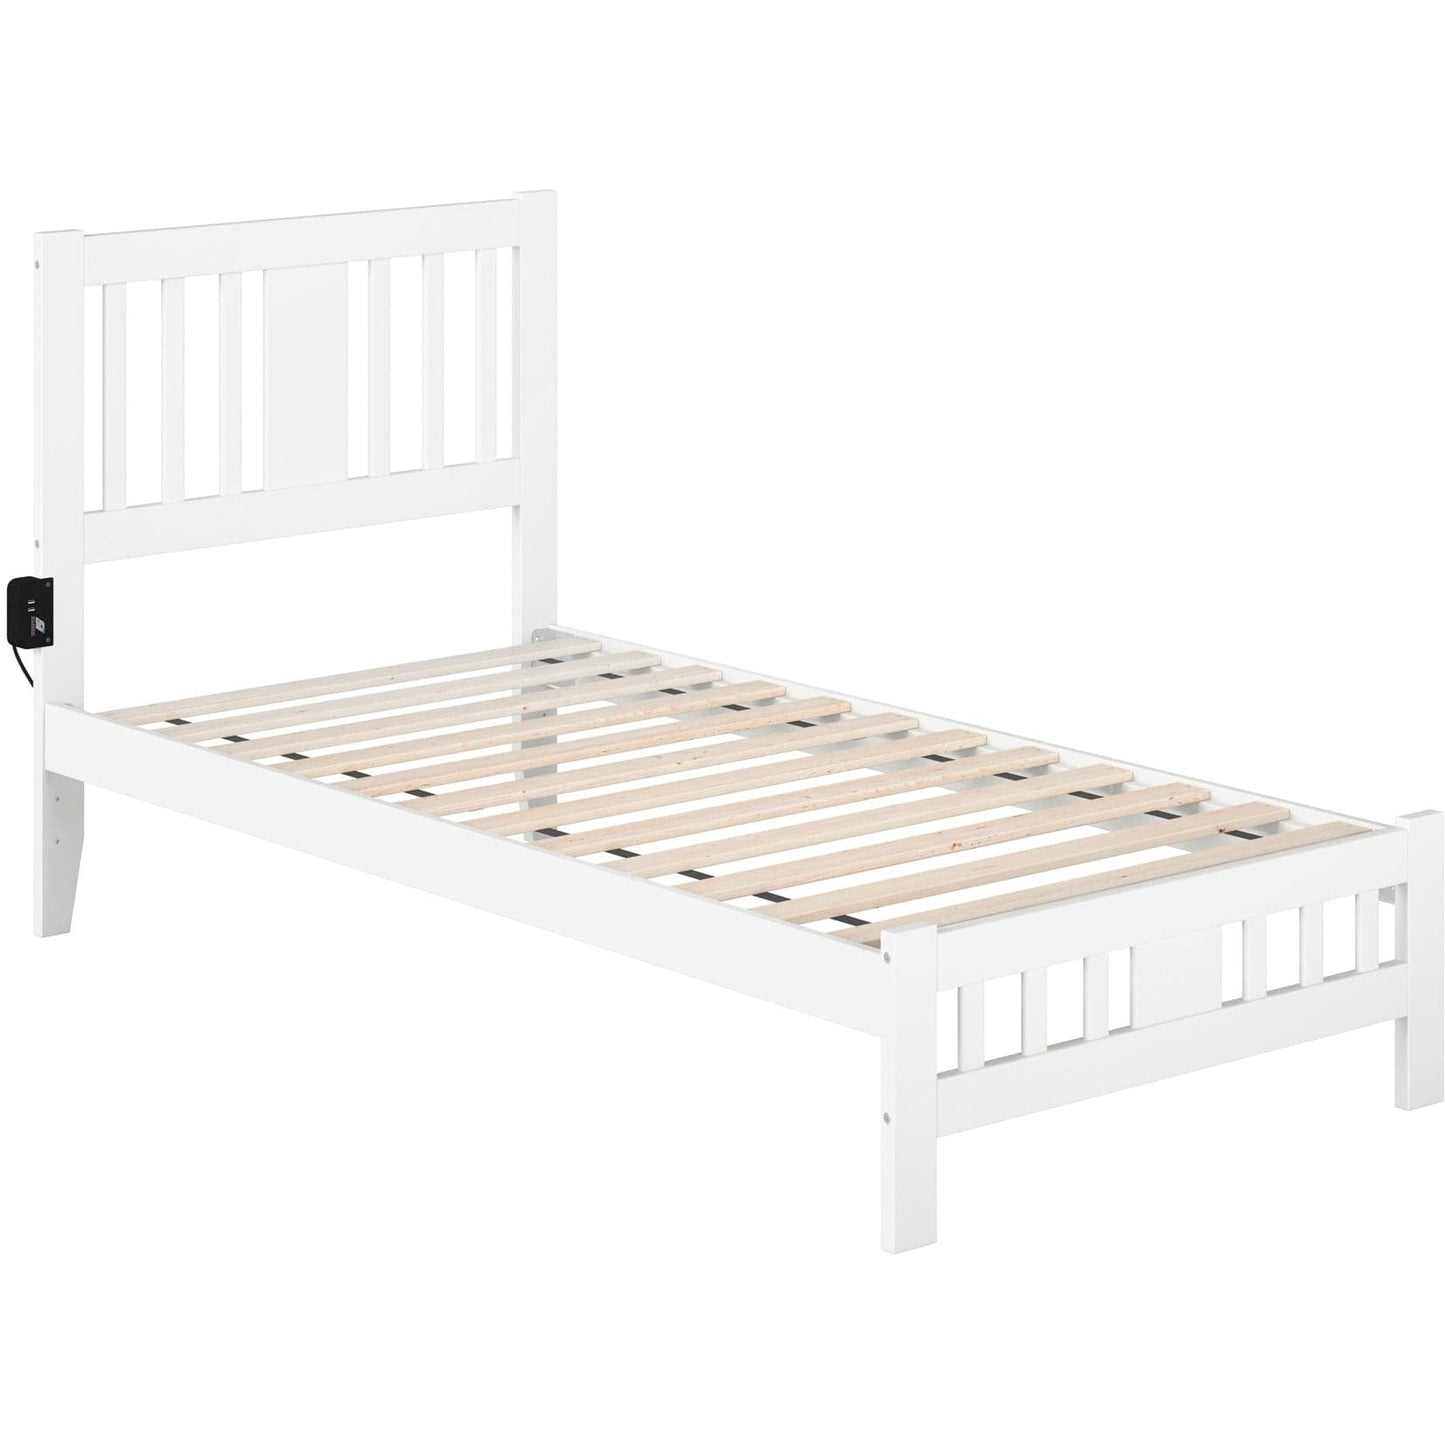 AFI Furnishings Tahoe Twin Bed with Footboard in White AG8960022